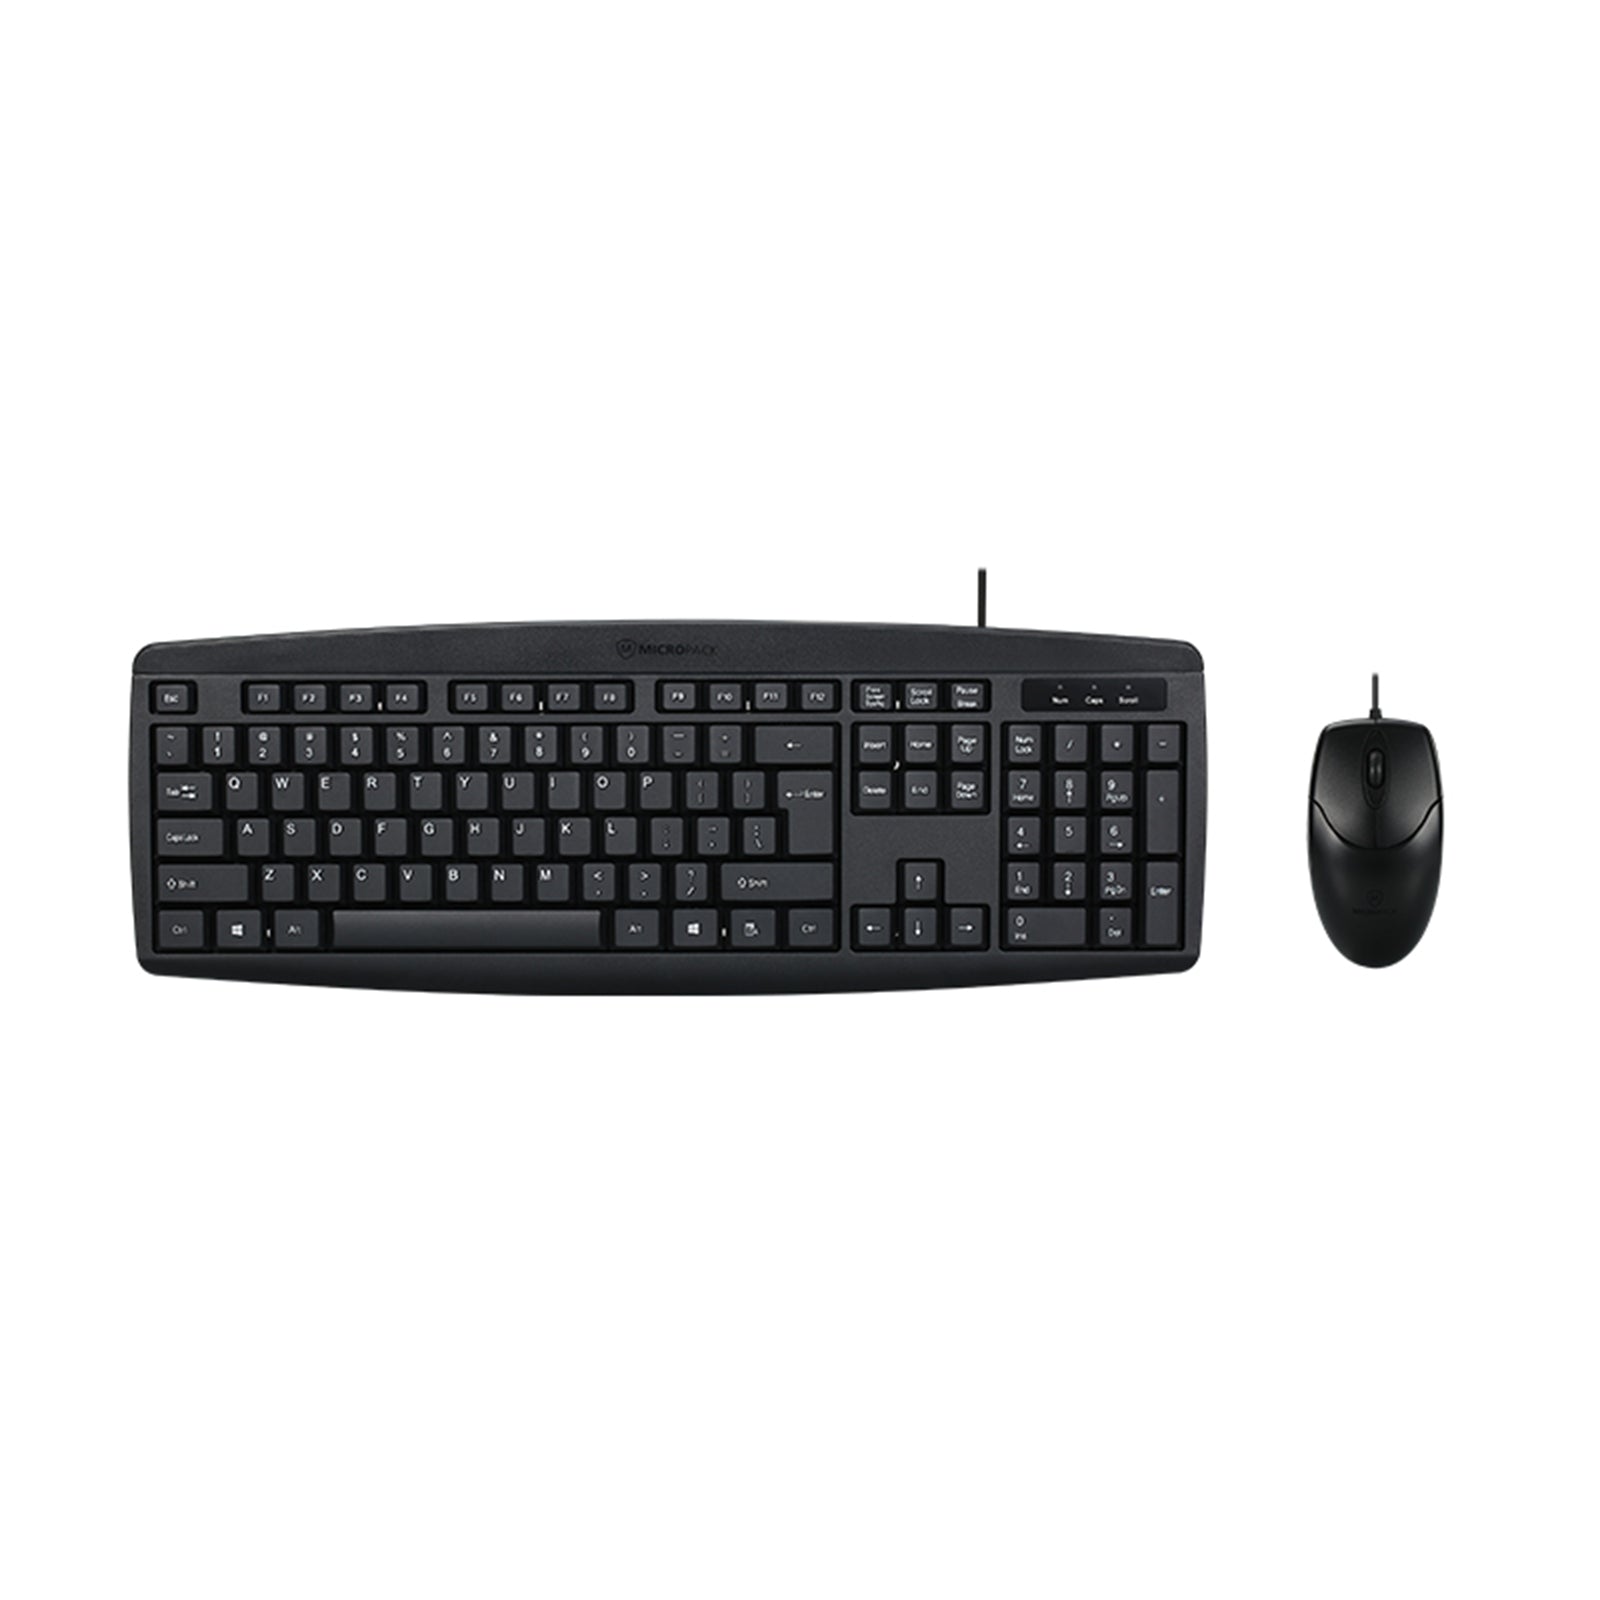 classic-desktop-pc-laptop-wired-combination-mouse-keyboard-interface-black-sets